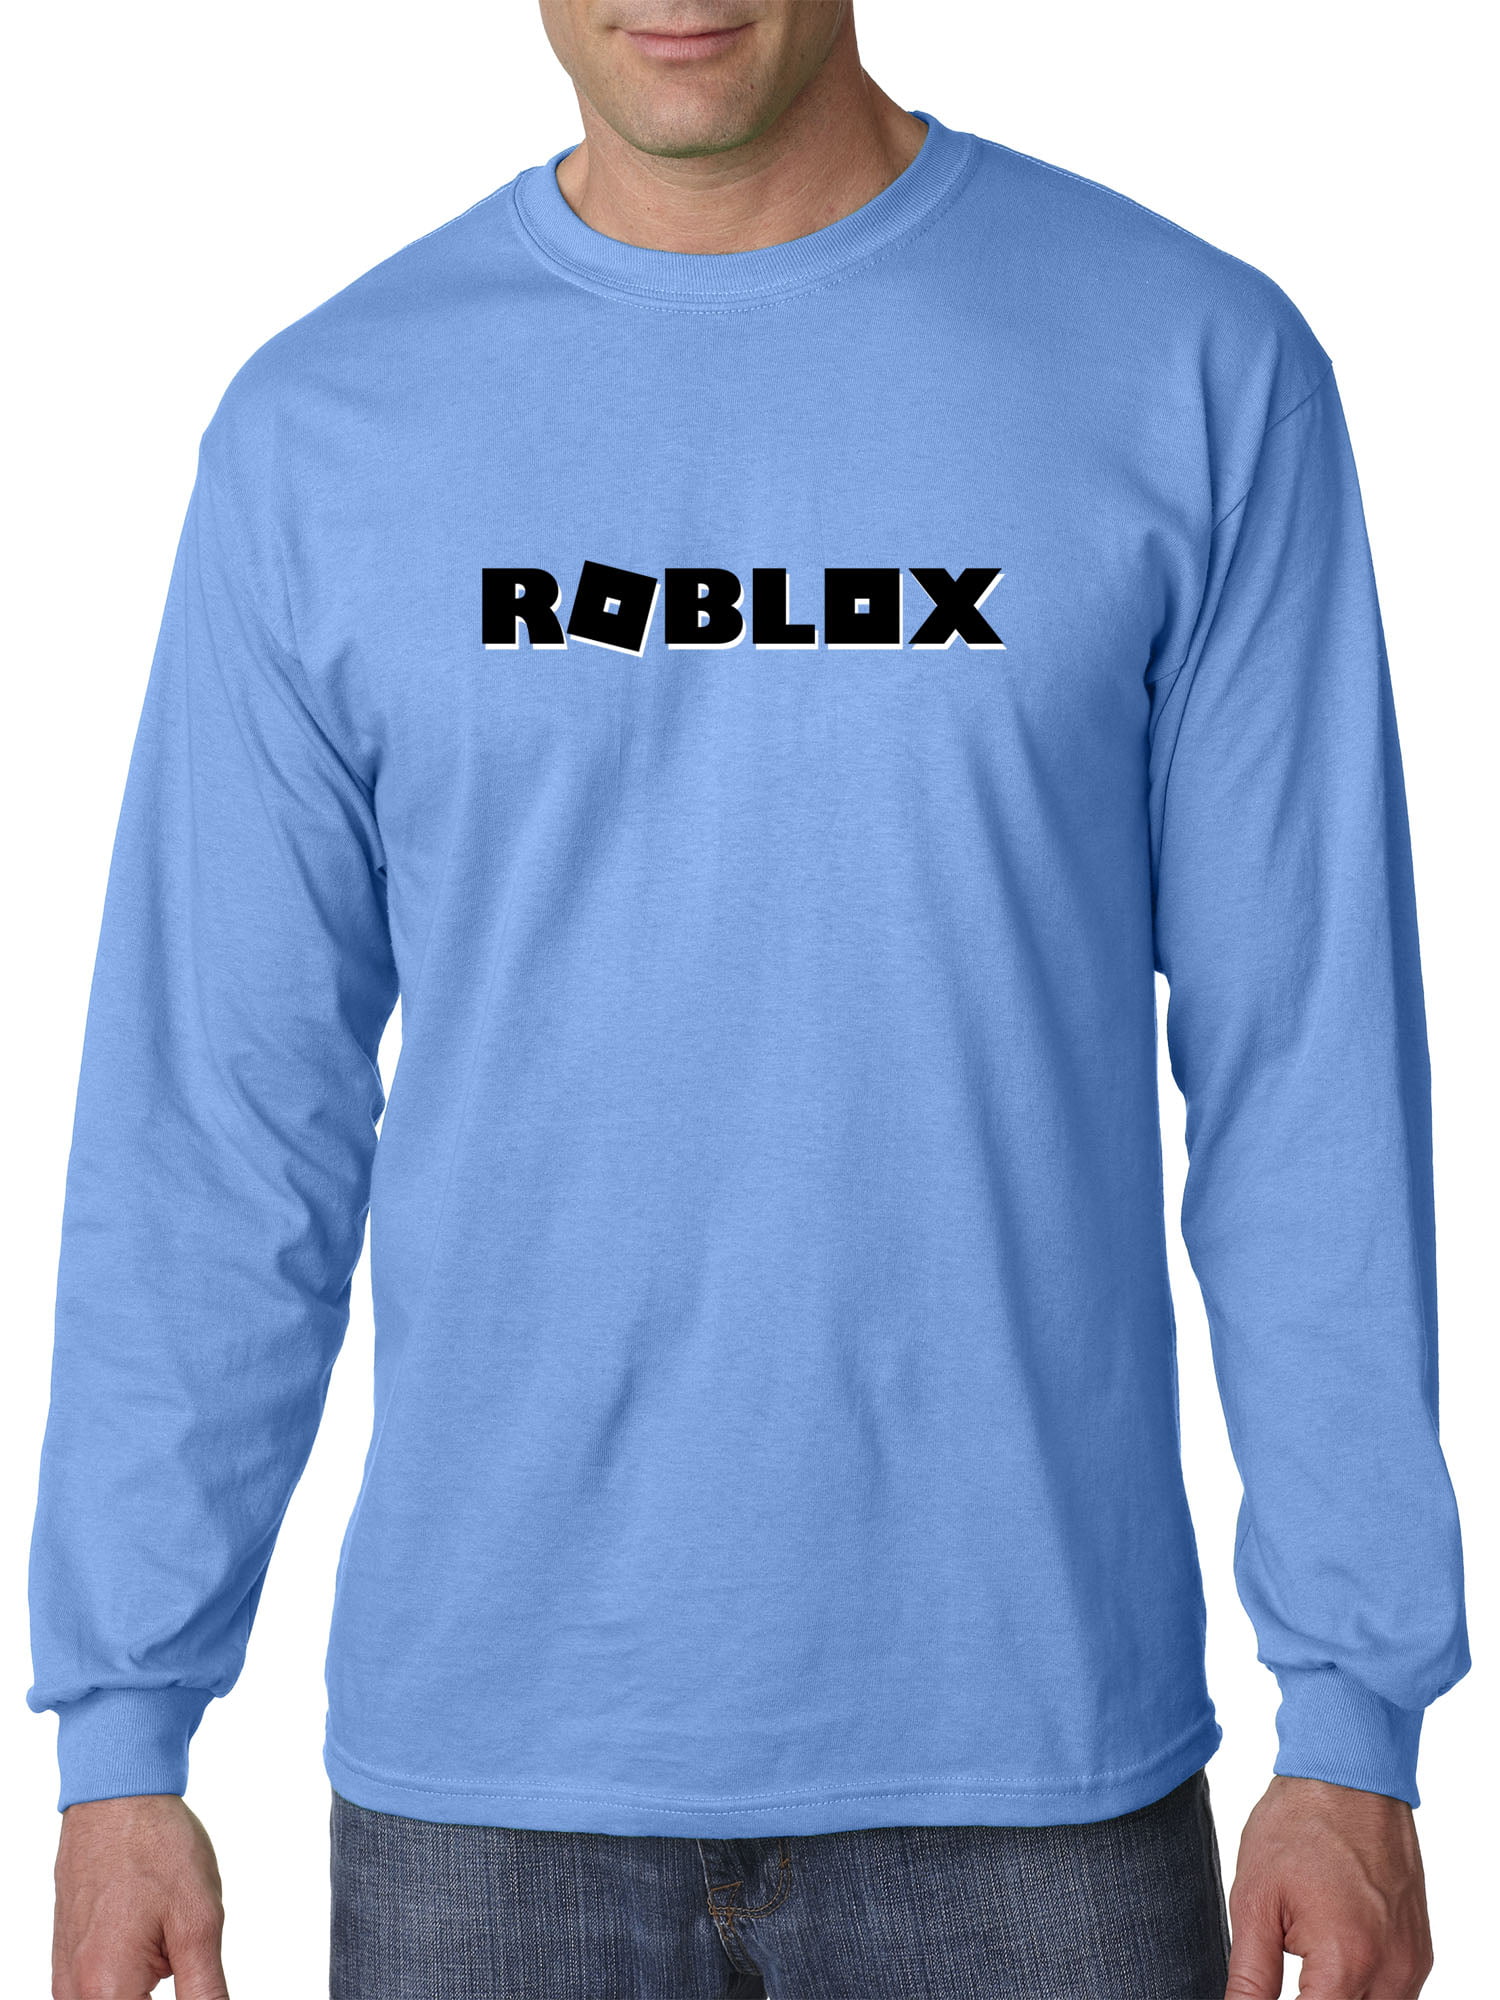 Roblox T Shirt Blue Shop Clothing Shoes Online - motorcycle bacon shirt roblox